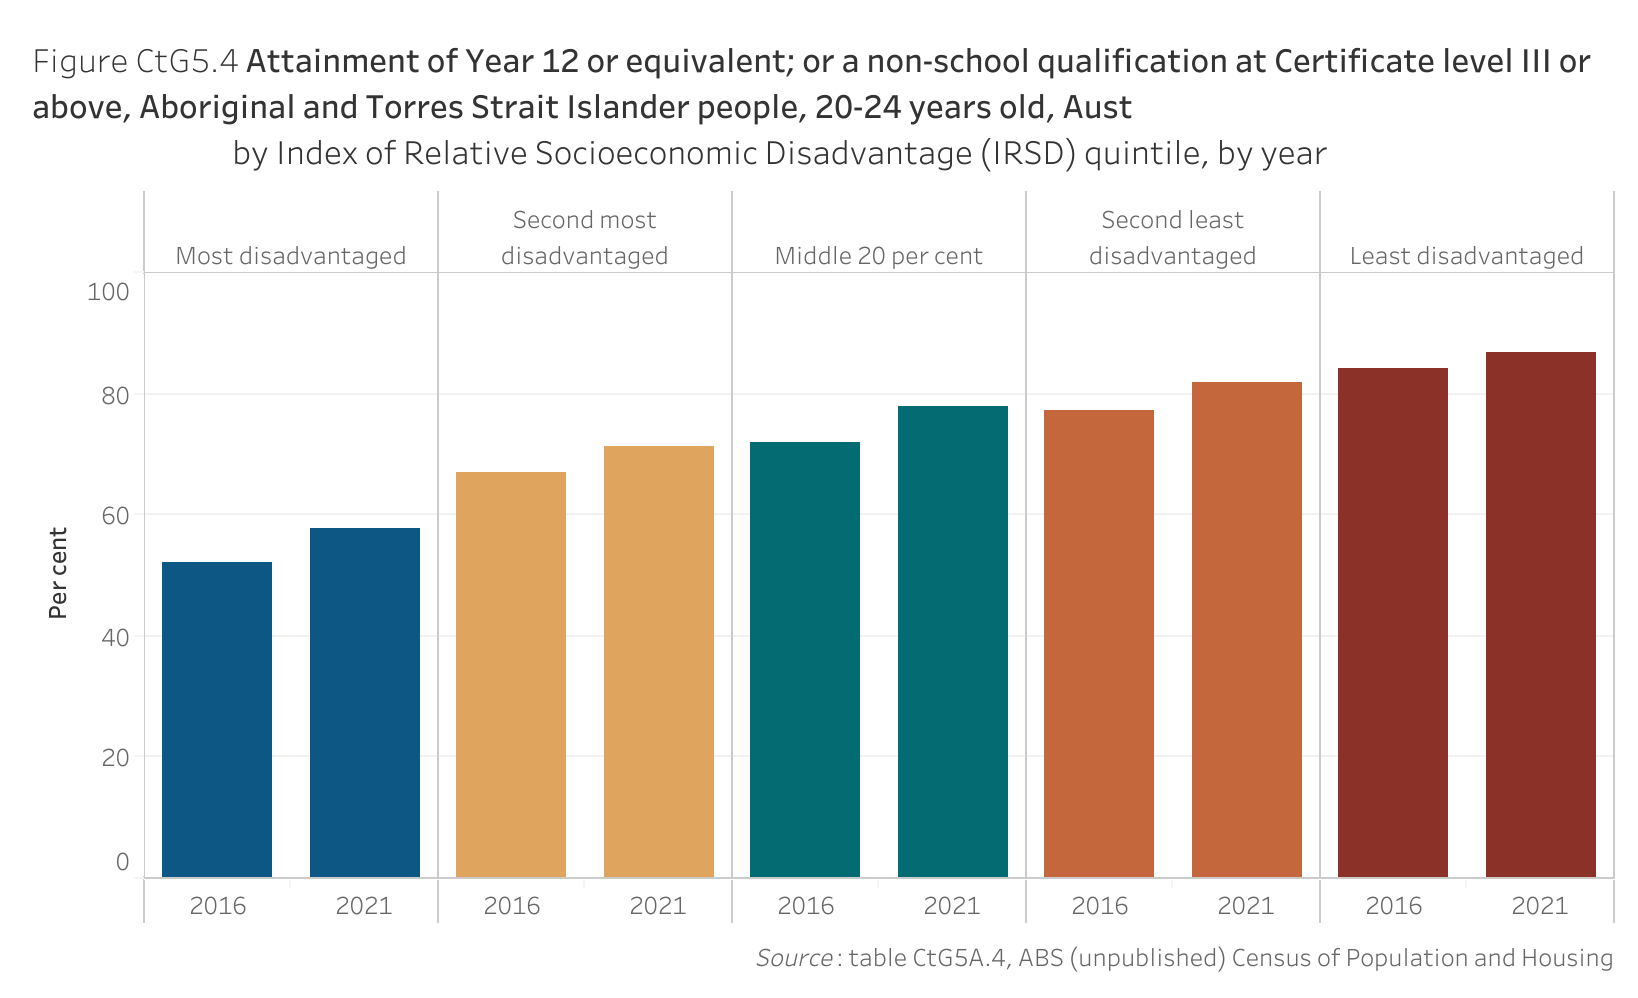 Figure CtG5.4 shows the attainment of Year 12 or equivalent; or a non-school qualification at Certificate level III or above, Aboriginal and Torres Strait Islander people, 20-24 years old, Australia, by Index of Relative Socioeconomic Disadvantage quintile, by year. More details can be found within the text near this image.